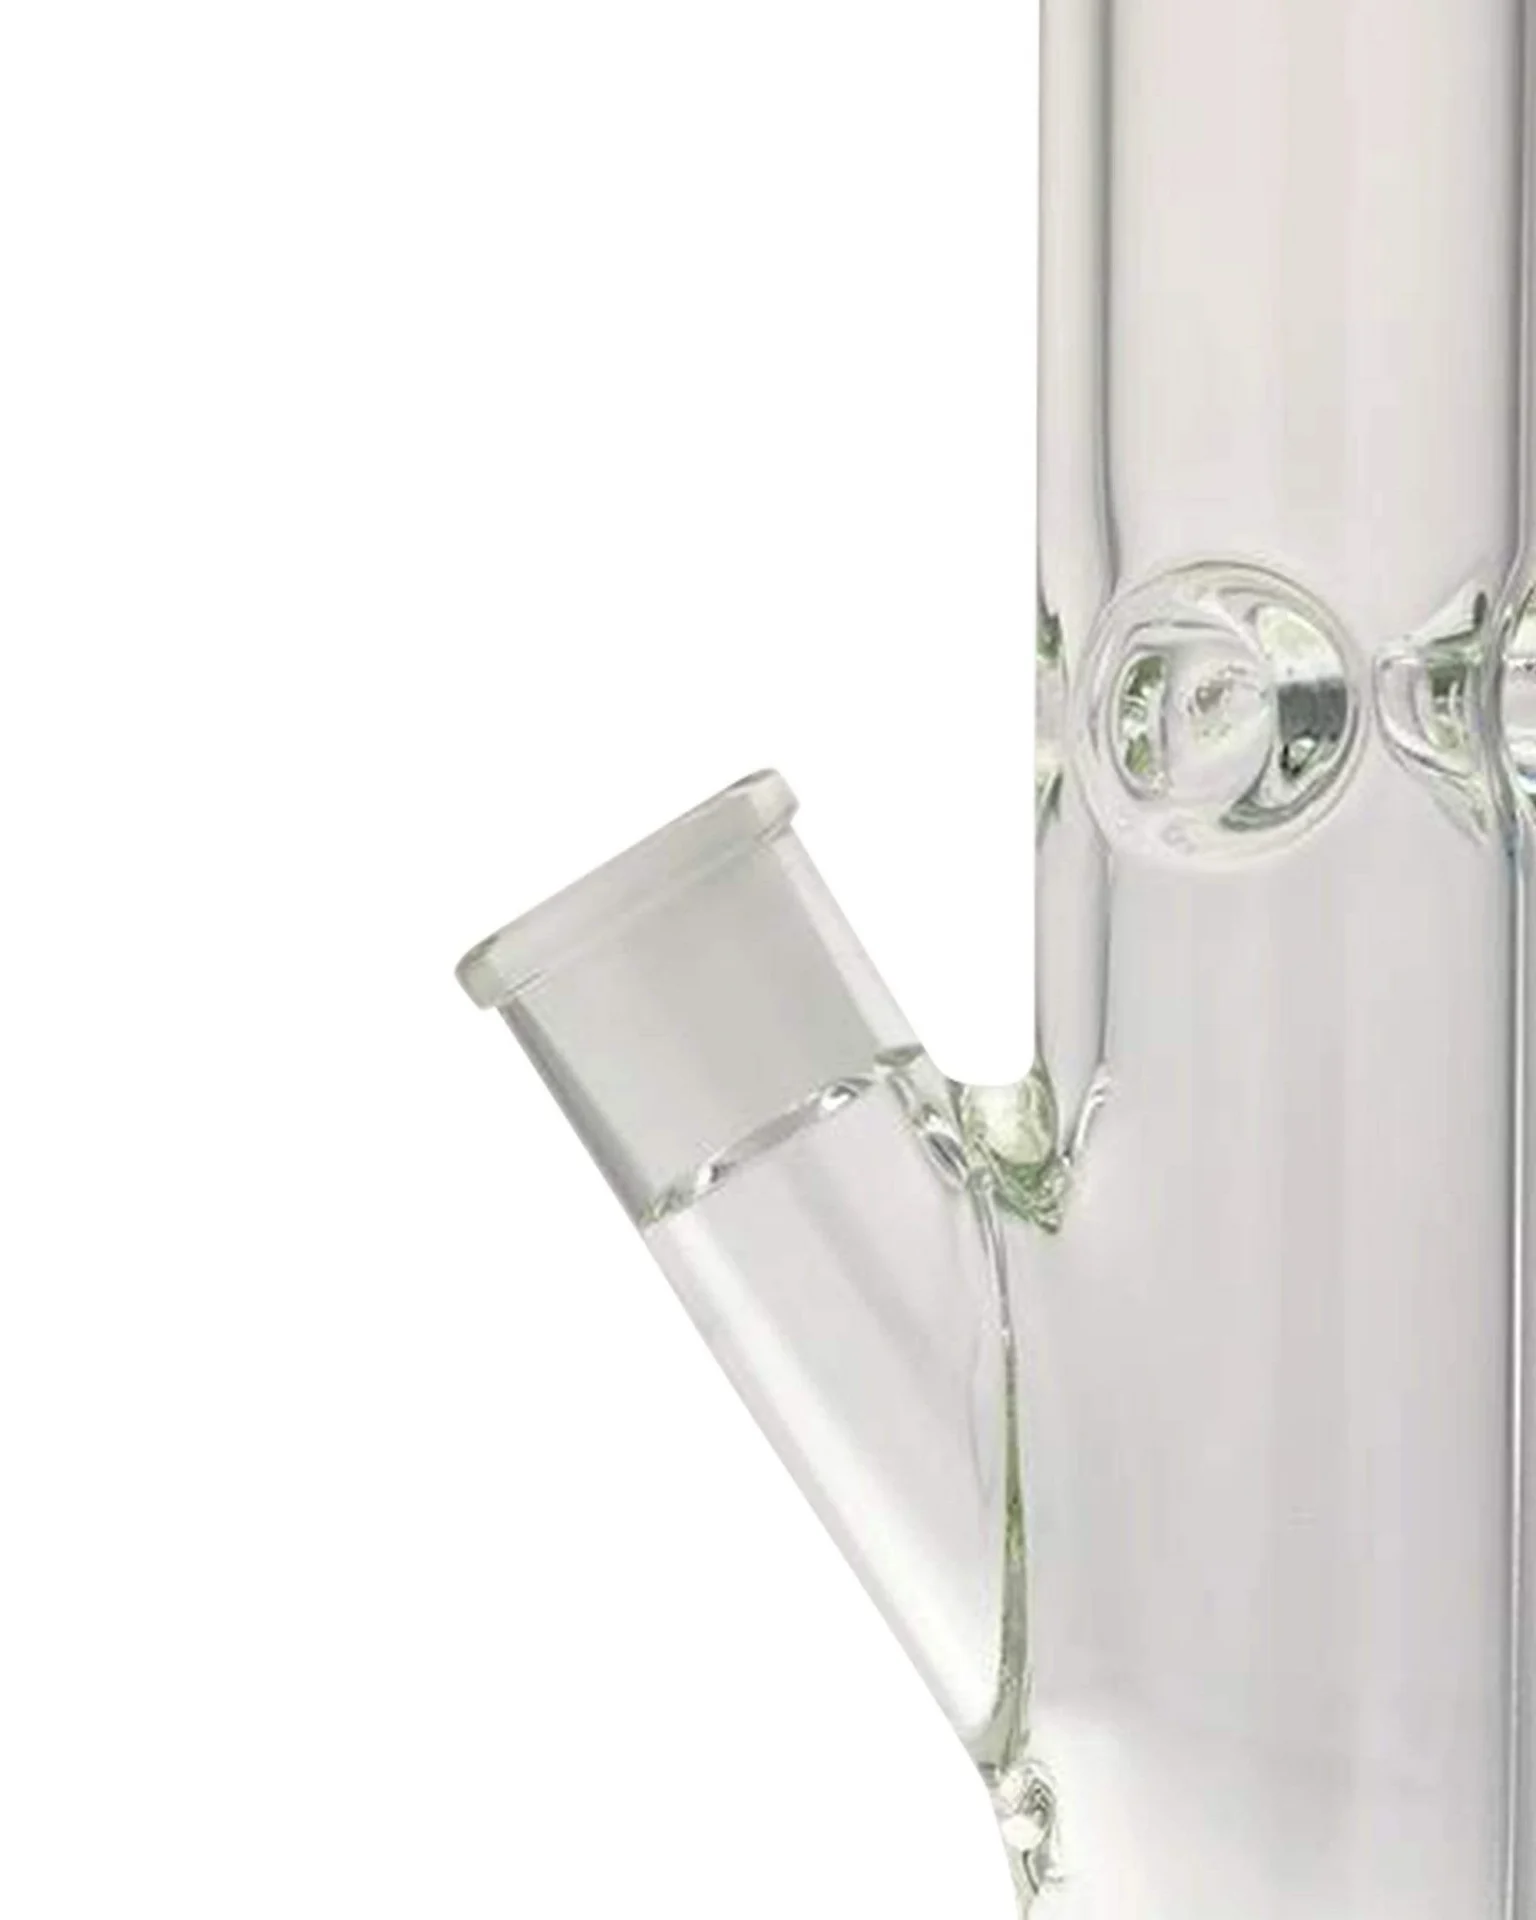 Thick Ass Glass 16" Super Thick Straight Tube